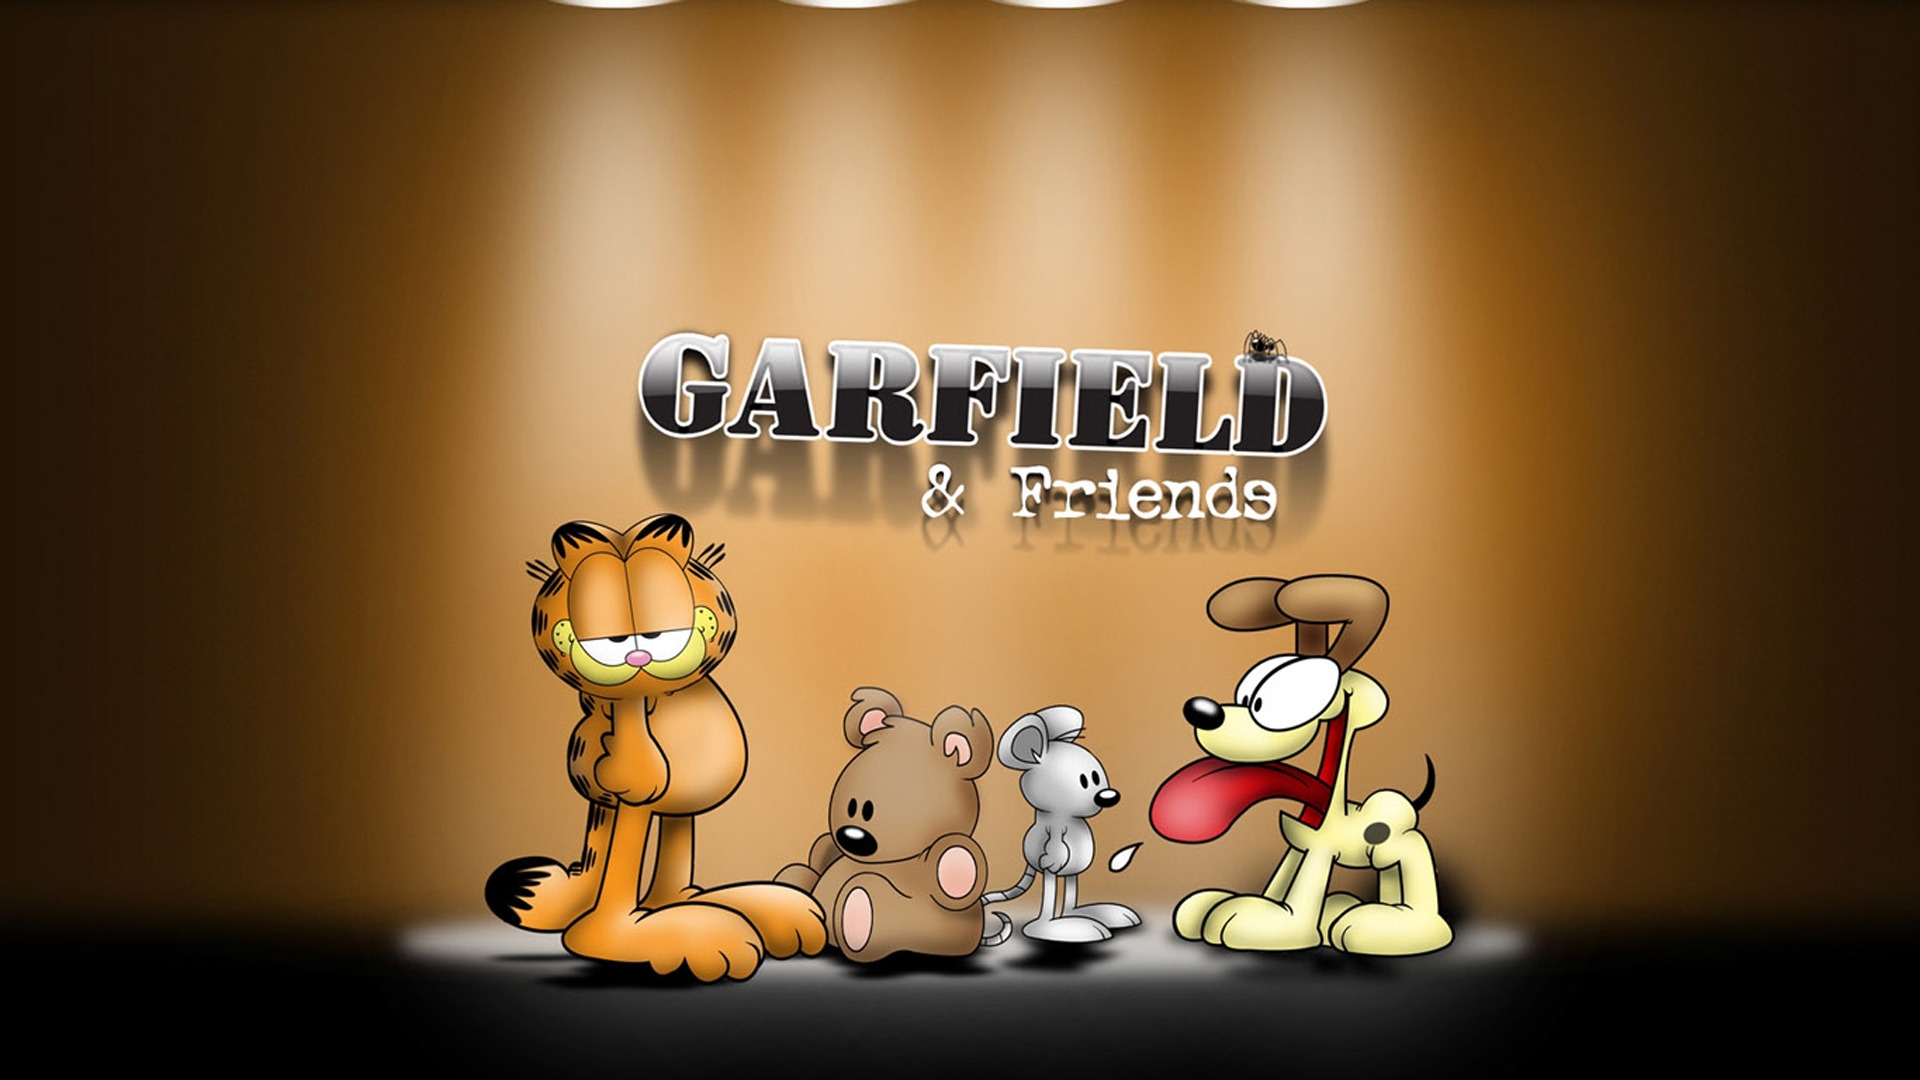 Garfield and Friends for 1920 x 1080 HDTV 1080p resolution